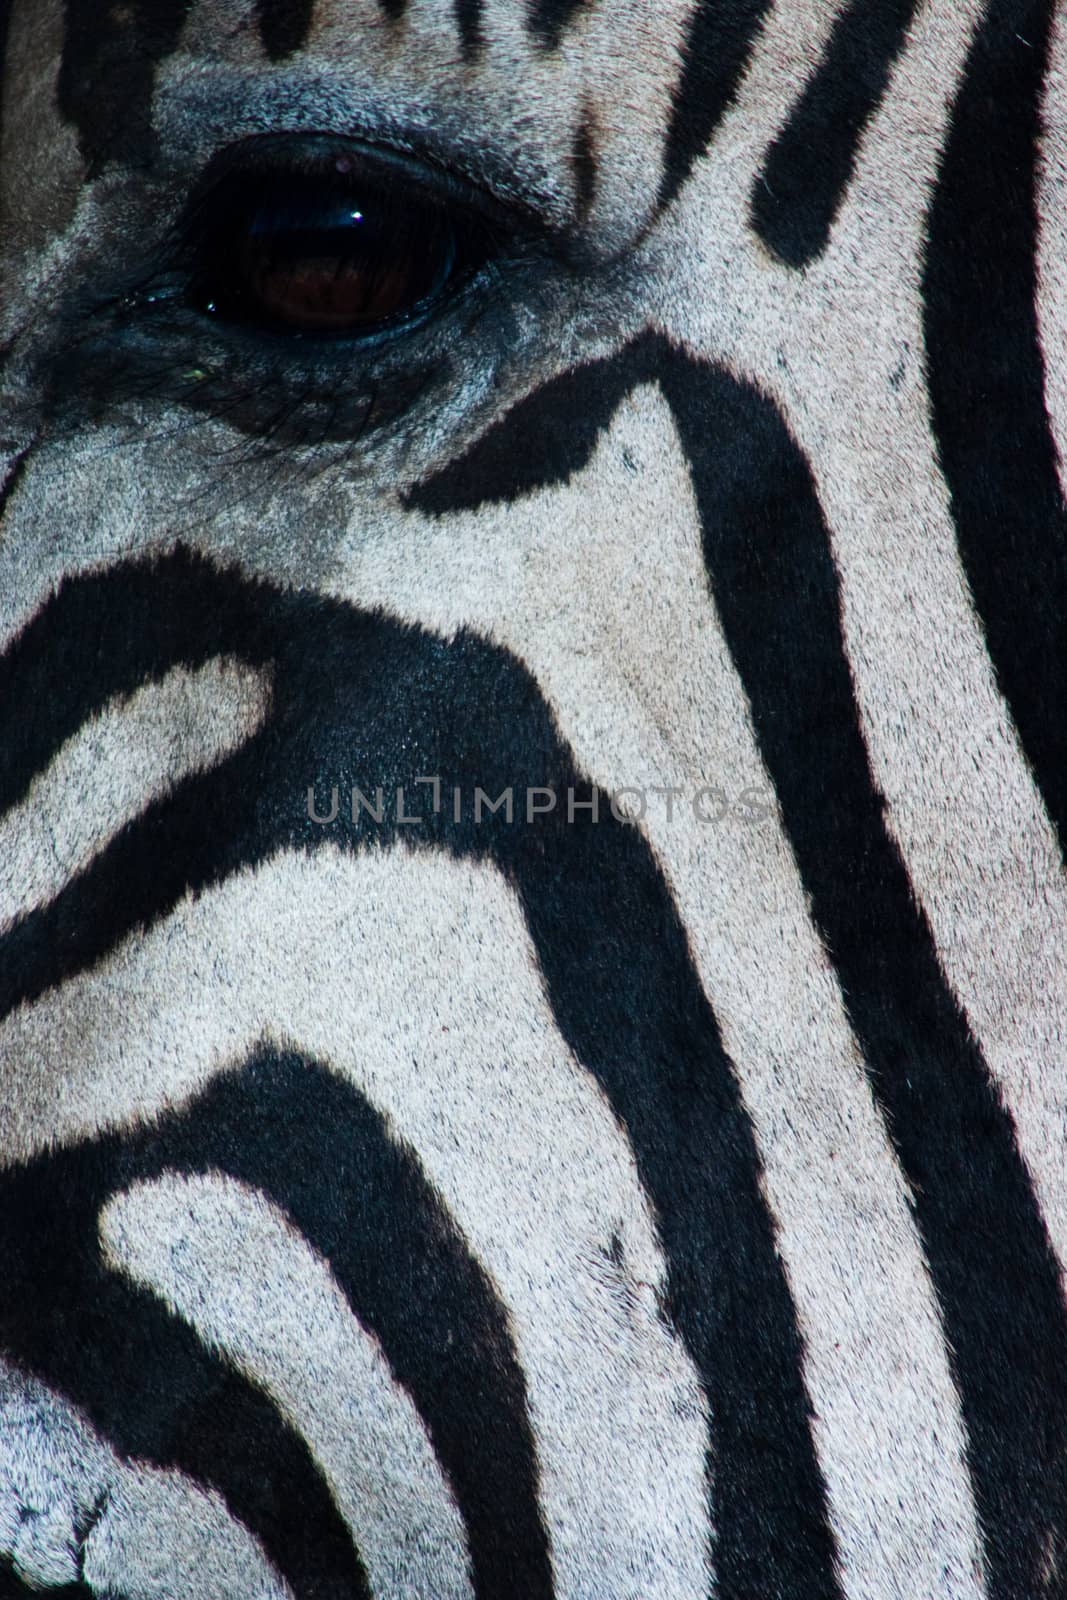 Close up of a zebra's face showing the eye and its black and white stripes